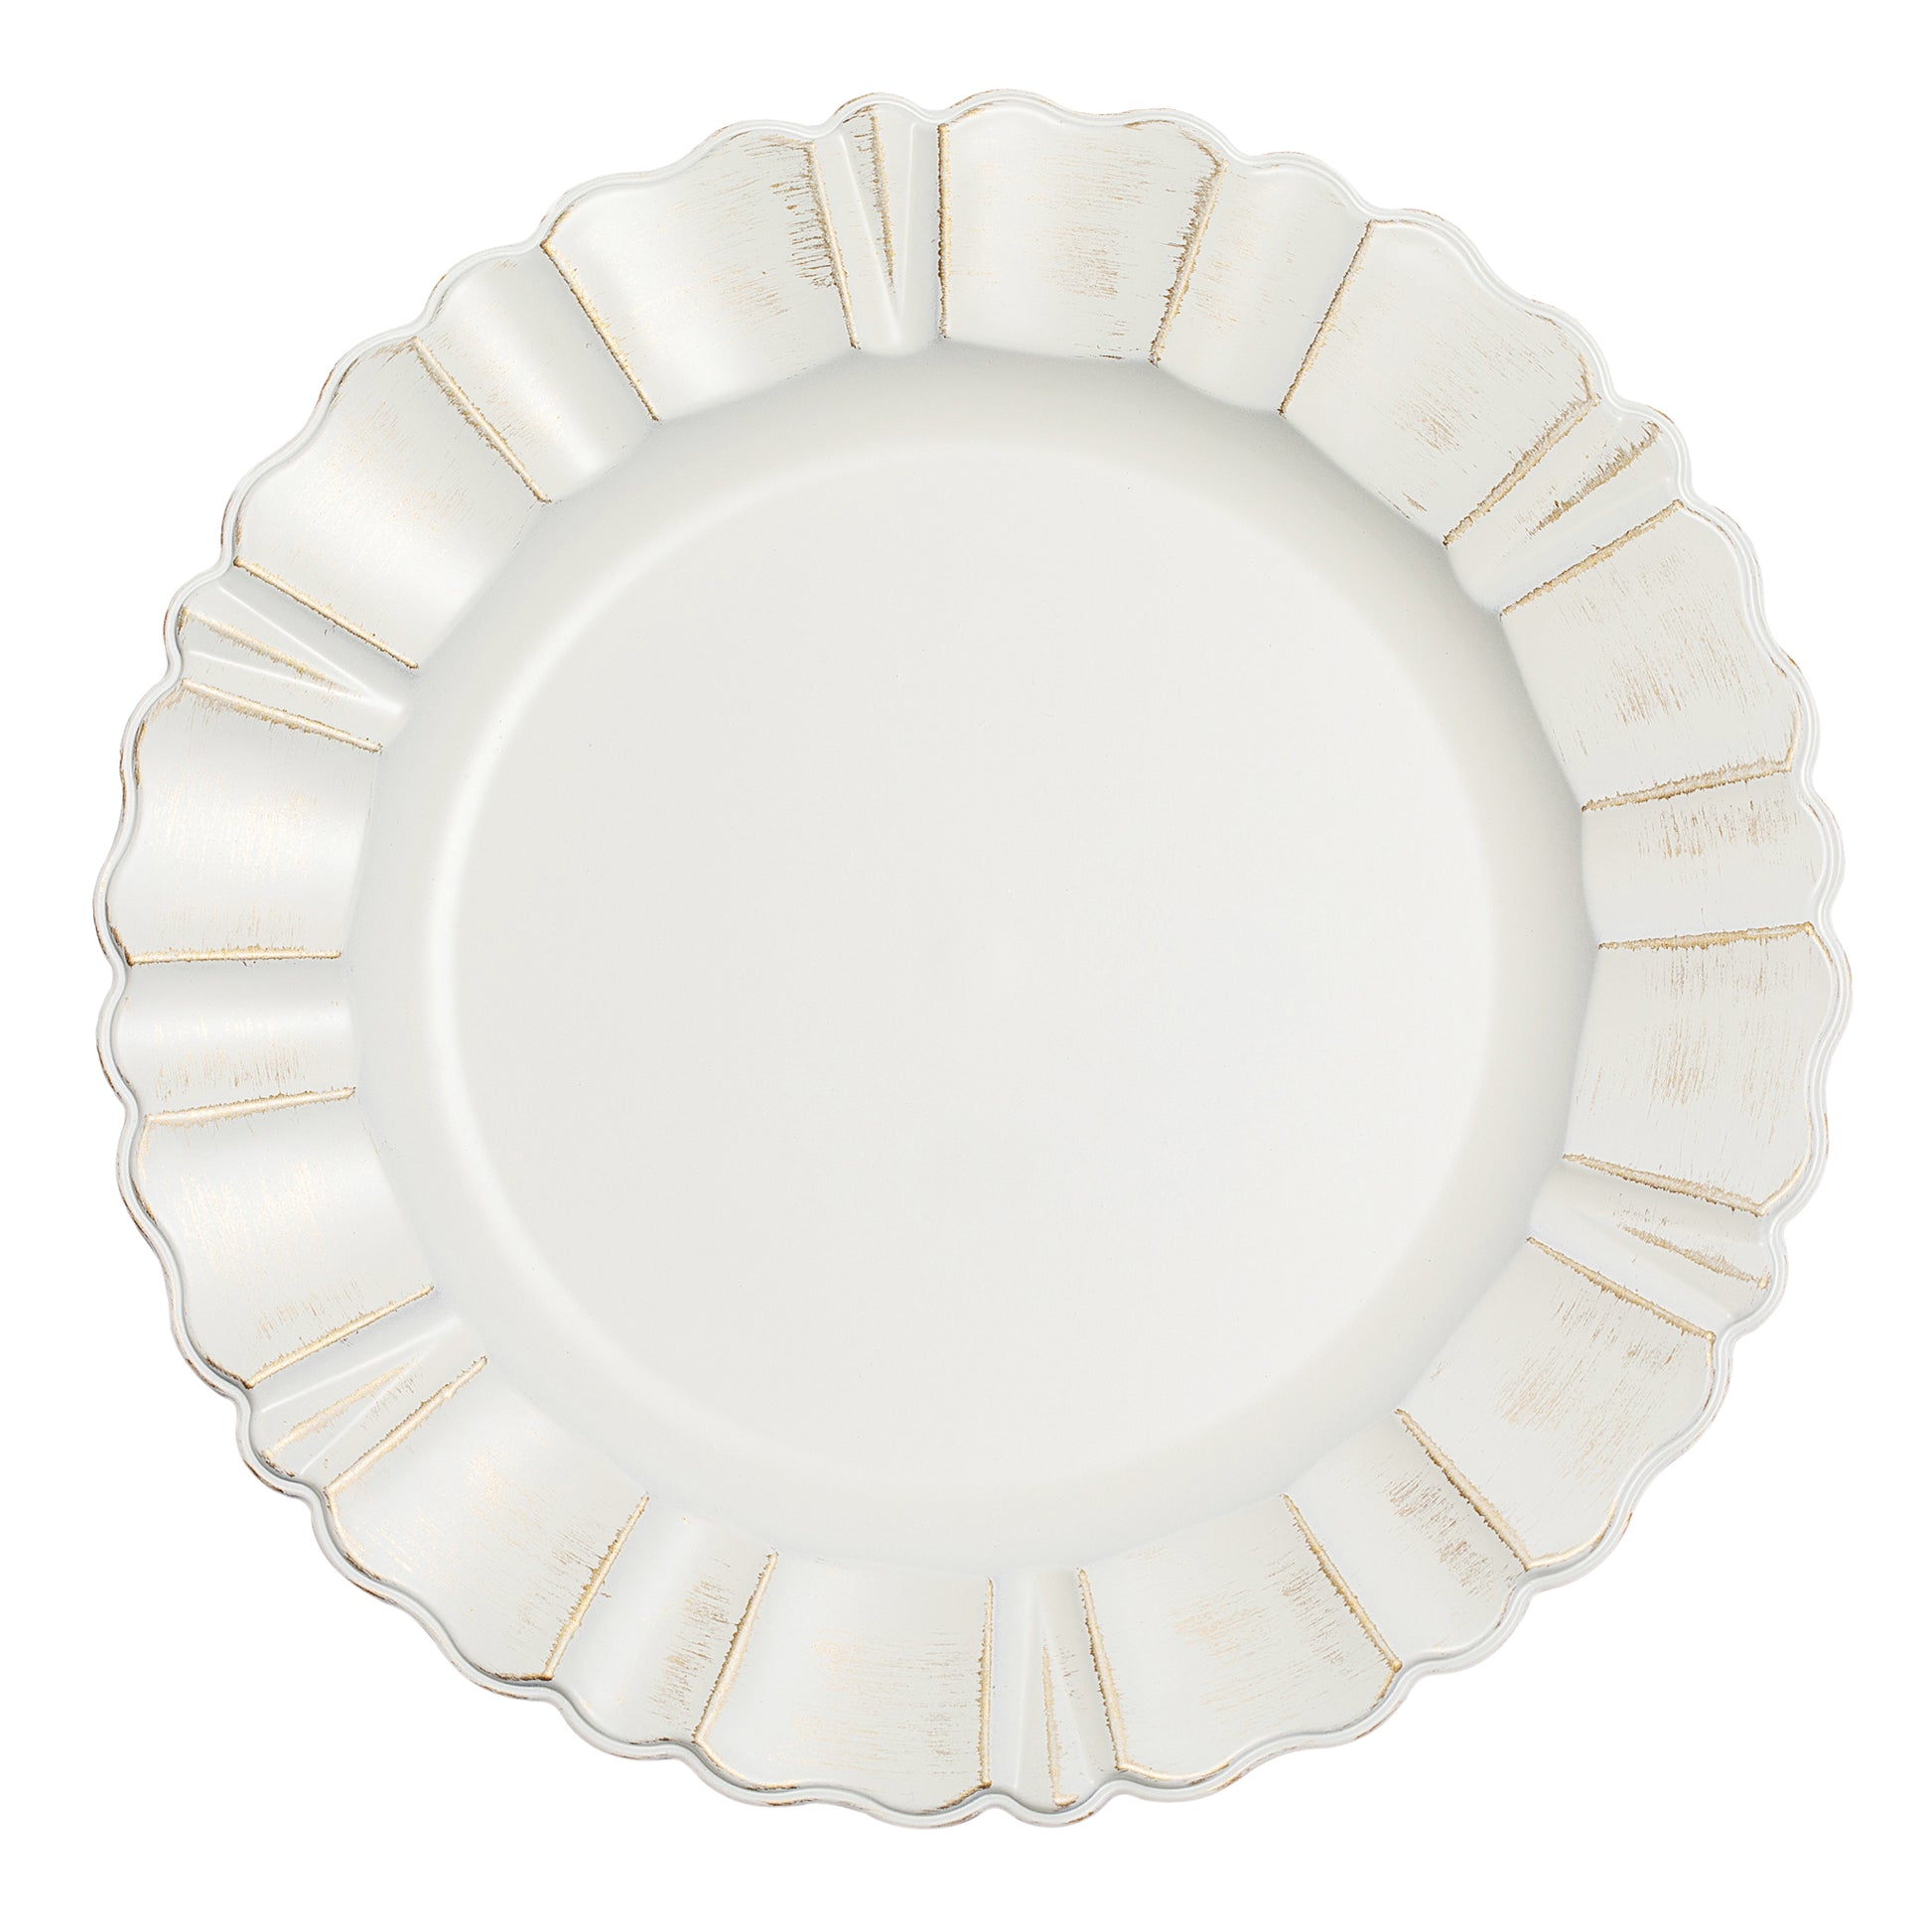 Waved Scalloped Acrylic 13" Charger Plate - Gold & Ivory - CV Linens